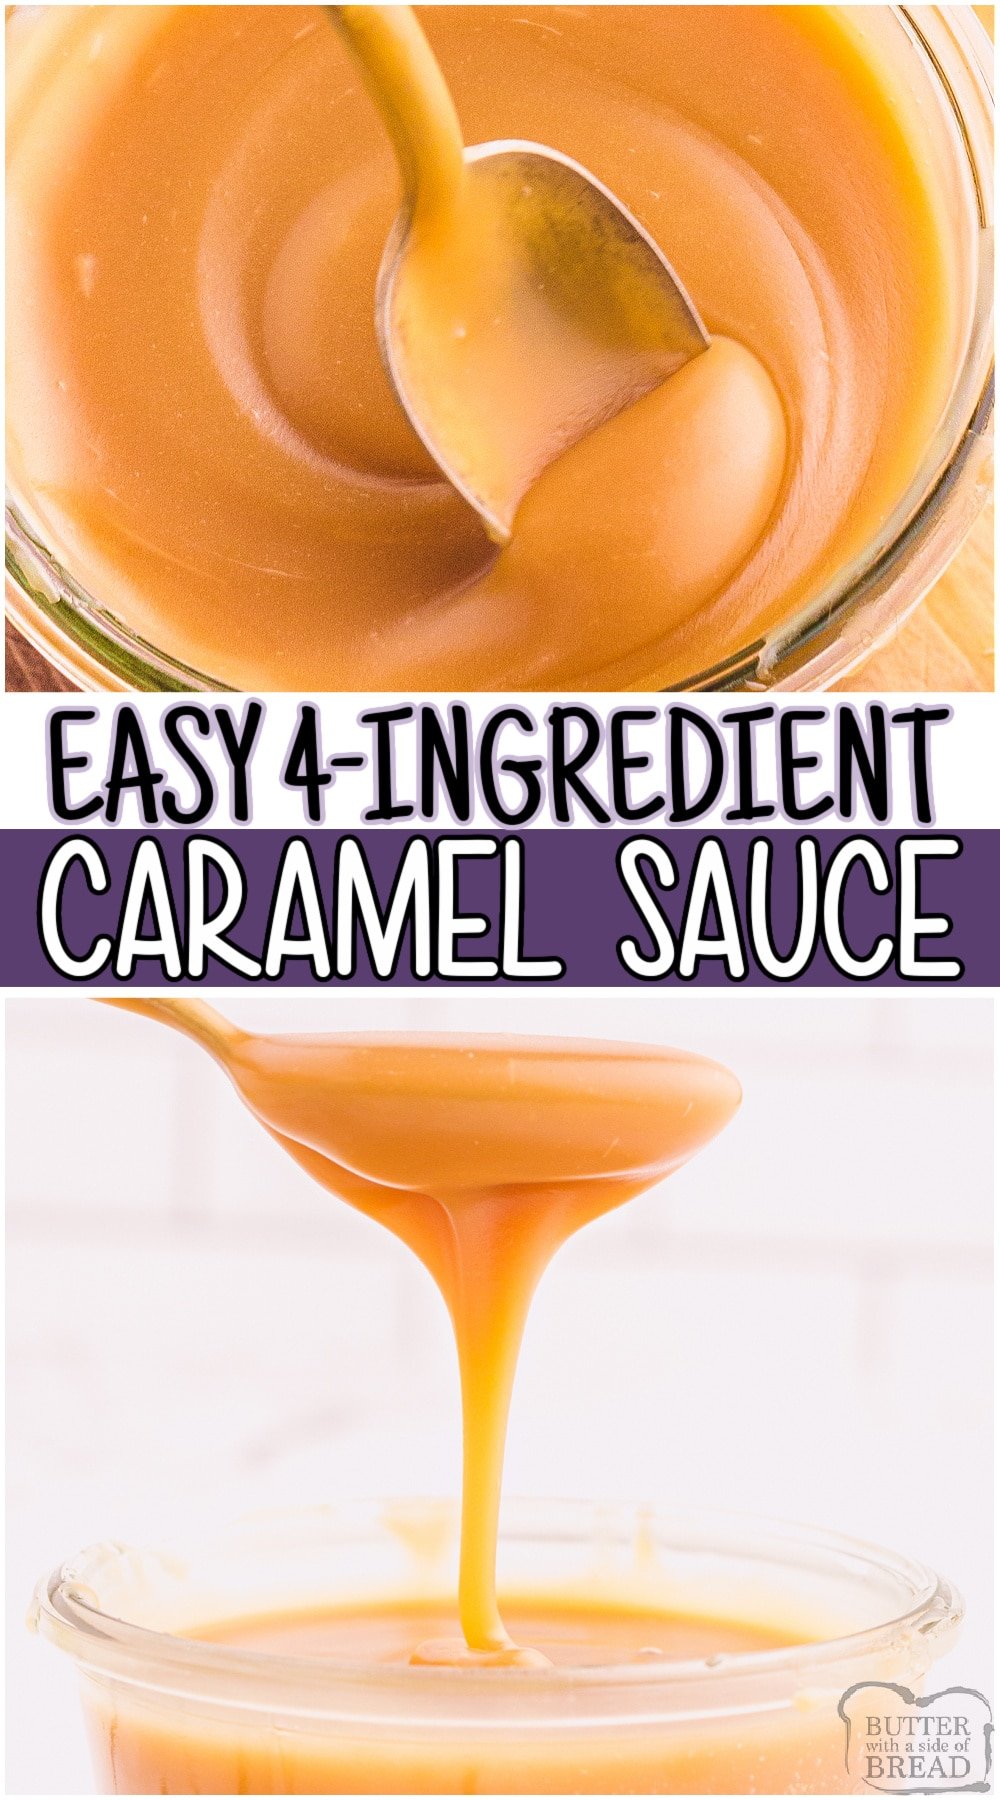 Easy Caramel sauce recipe made with just butter, sugar, cream & vanilla. Simple recipe for smooth, buttery caramel sauce perfect for ice cream topping, apple dipping & more! #caramel #homemade #easyrecipe from BUTTER WITH A SIDE OF BREAD